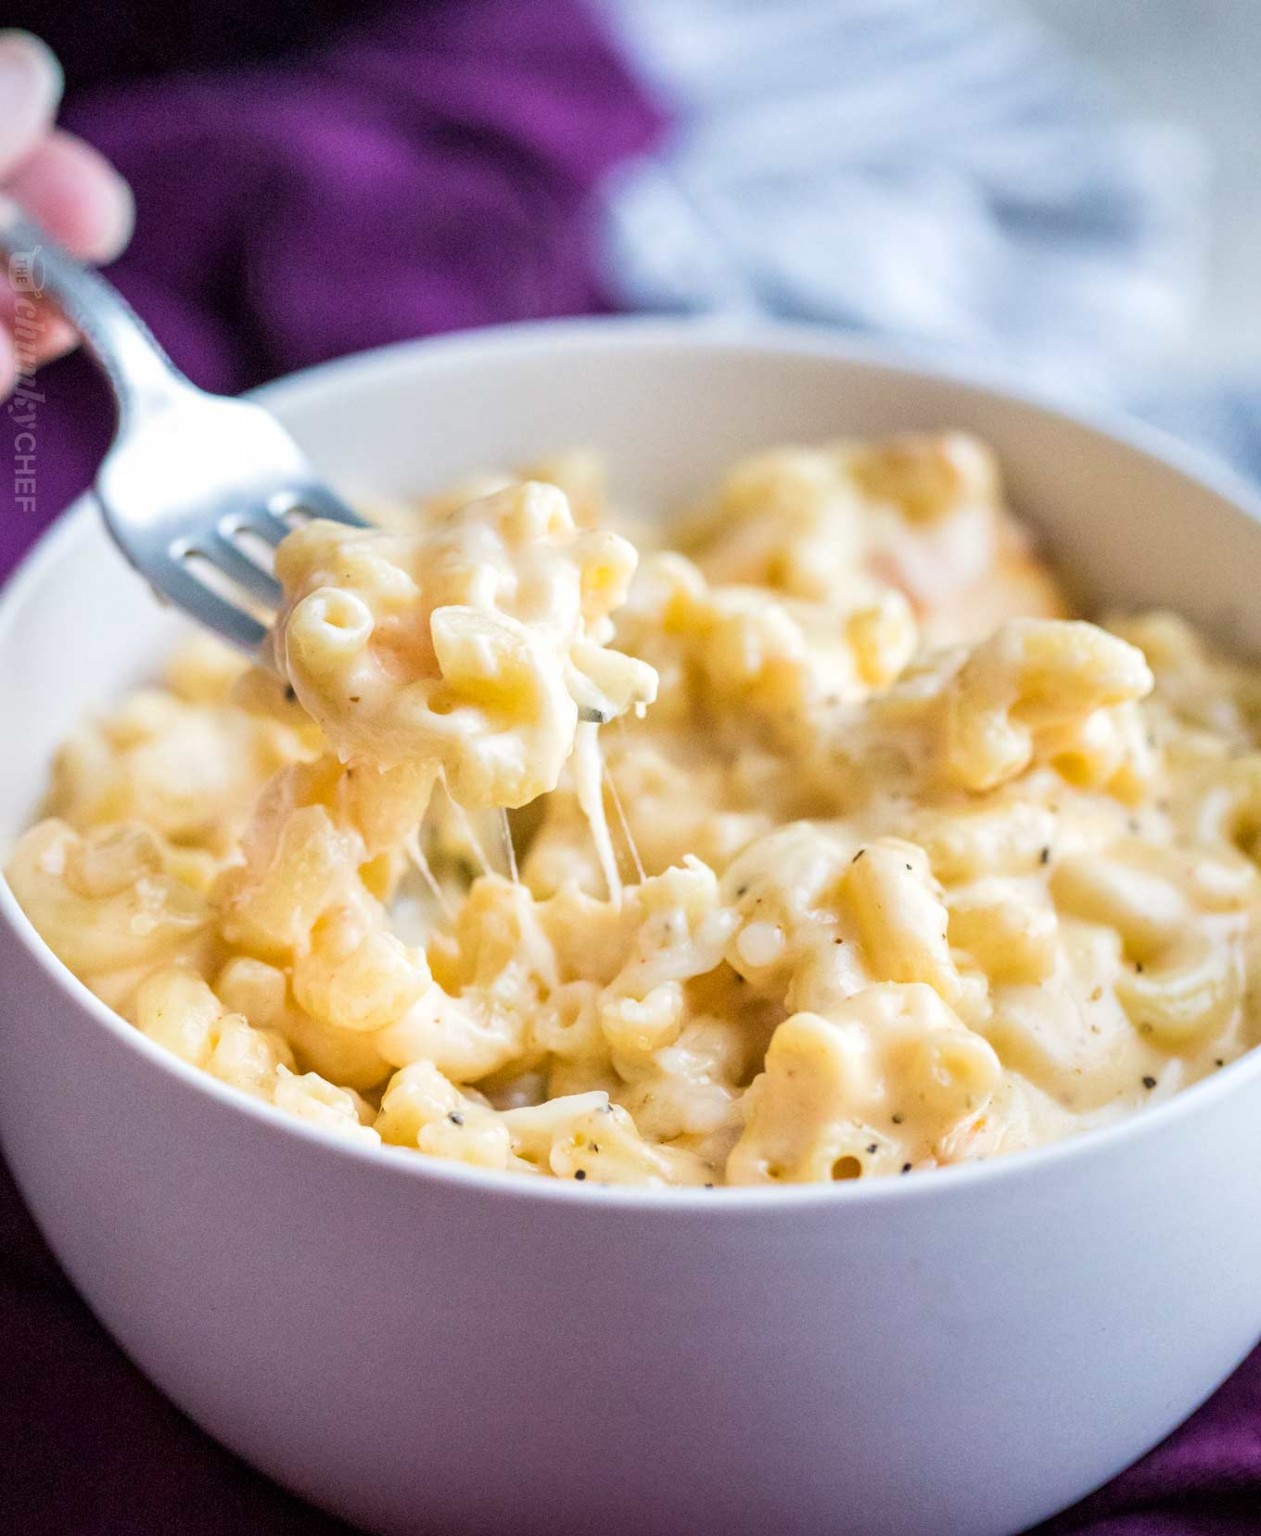 Tobias Young Mac And Cheese Recipe - Find Vegetarian Recipes